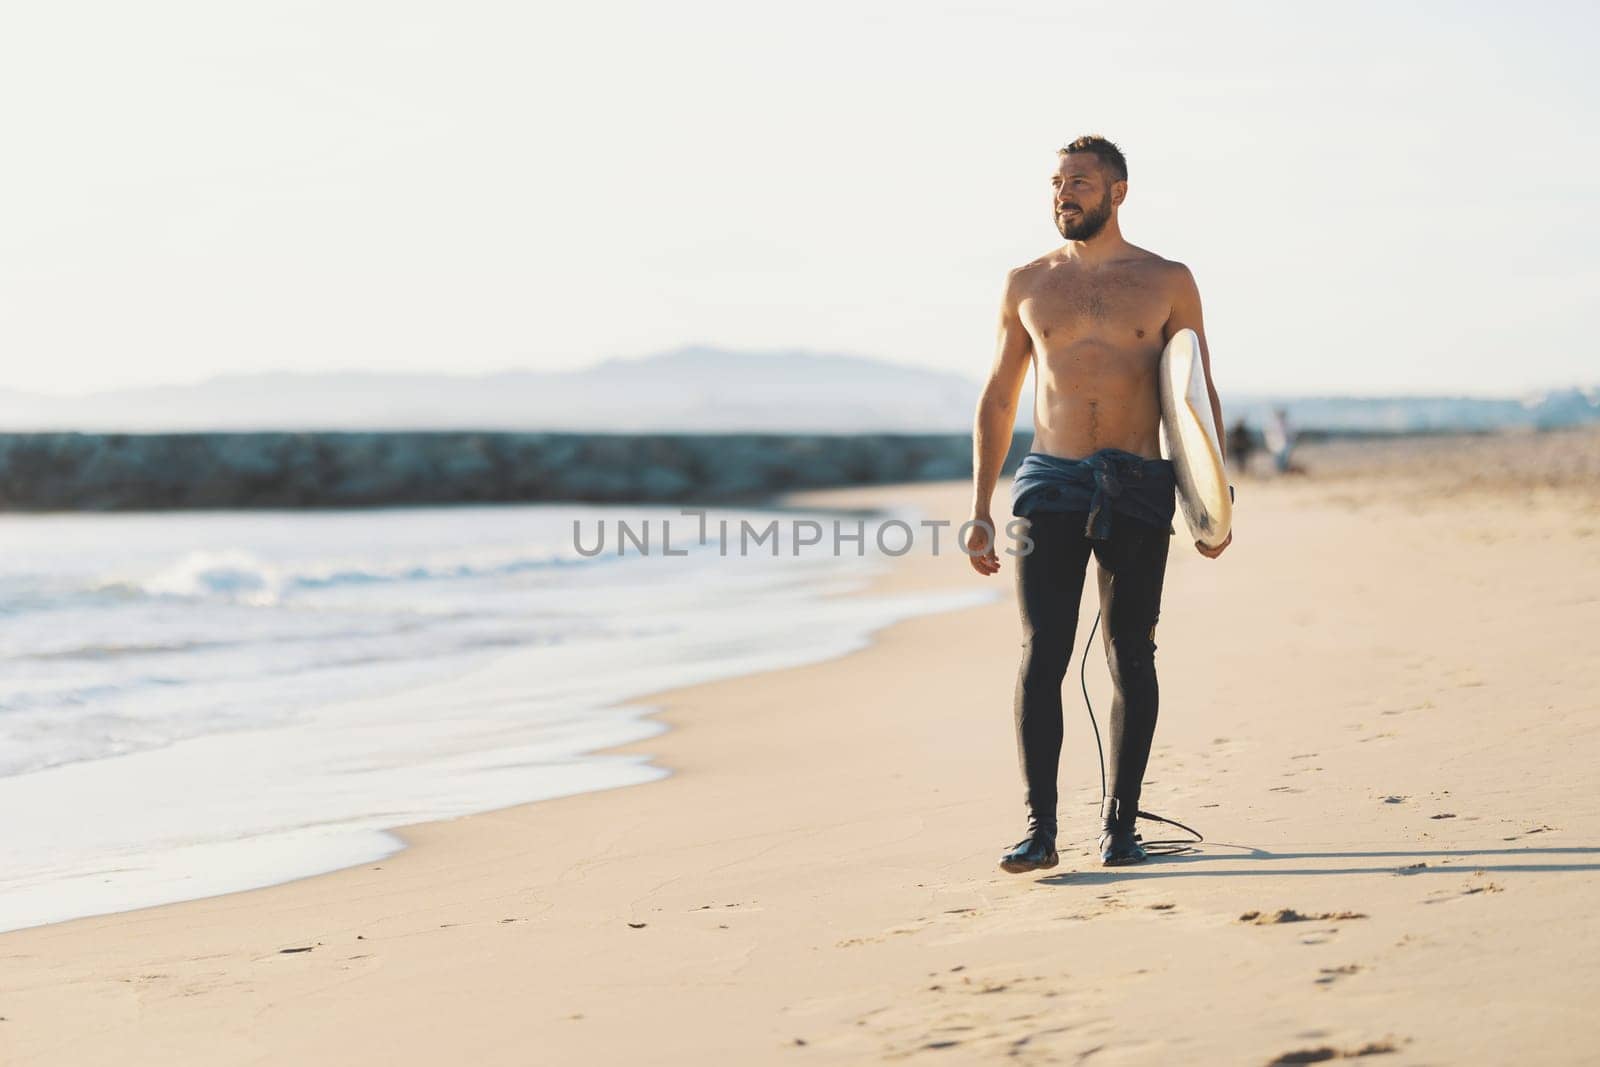 An athletic man surfer with naked torso standing on the seashore. Mid shot